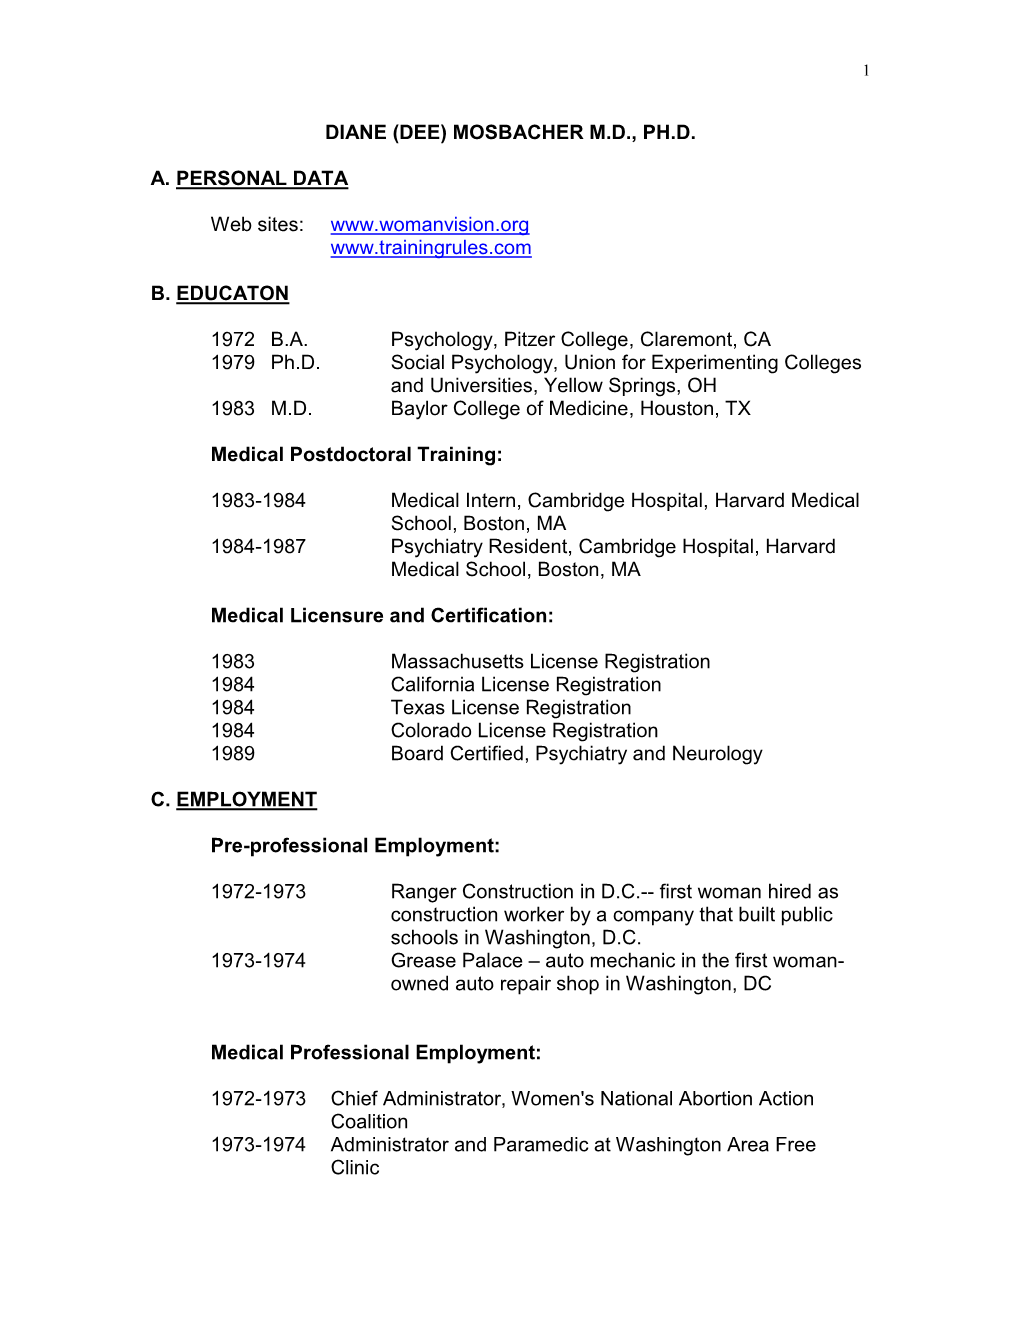 Download Dr. Dee Mosbacher's Resume